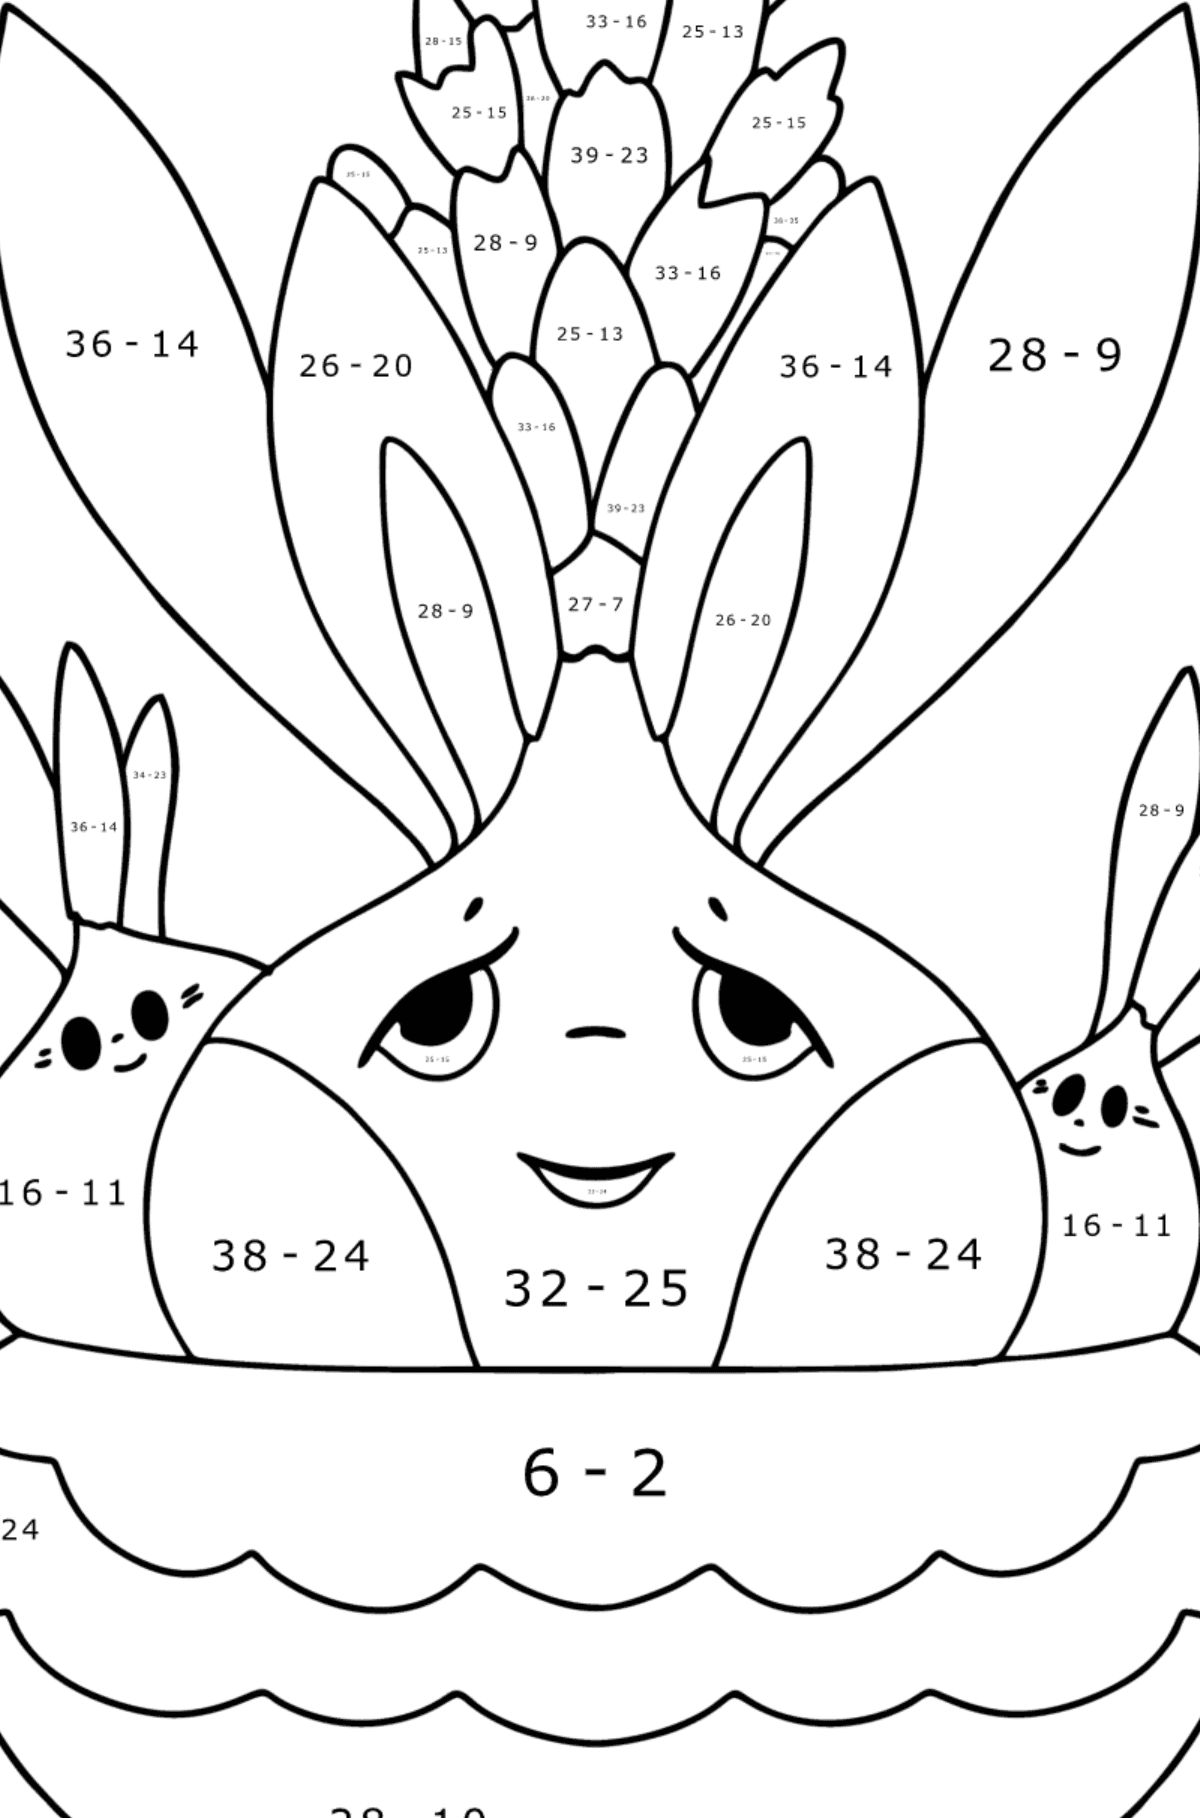 Hyacinth flowers with eyes coloring page - Math Coloring - Subtraction for Kids